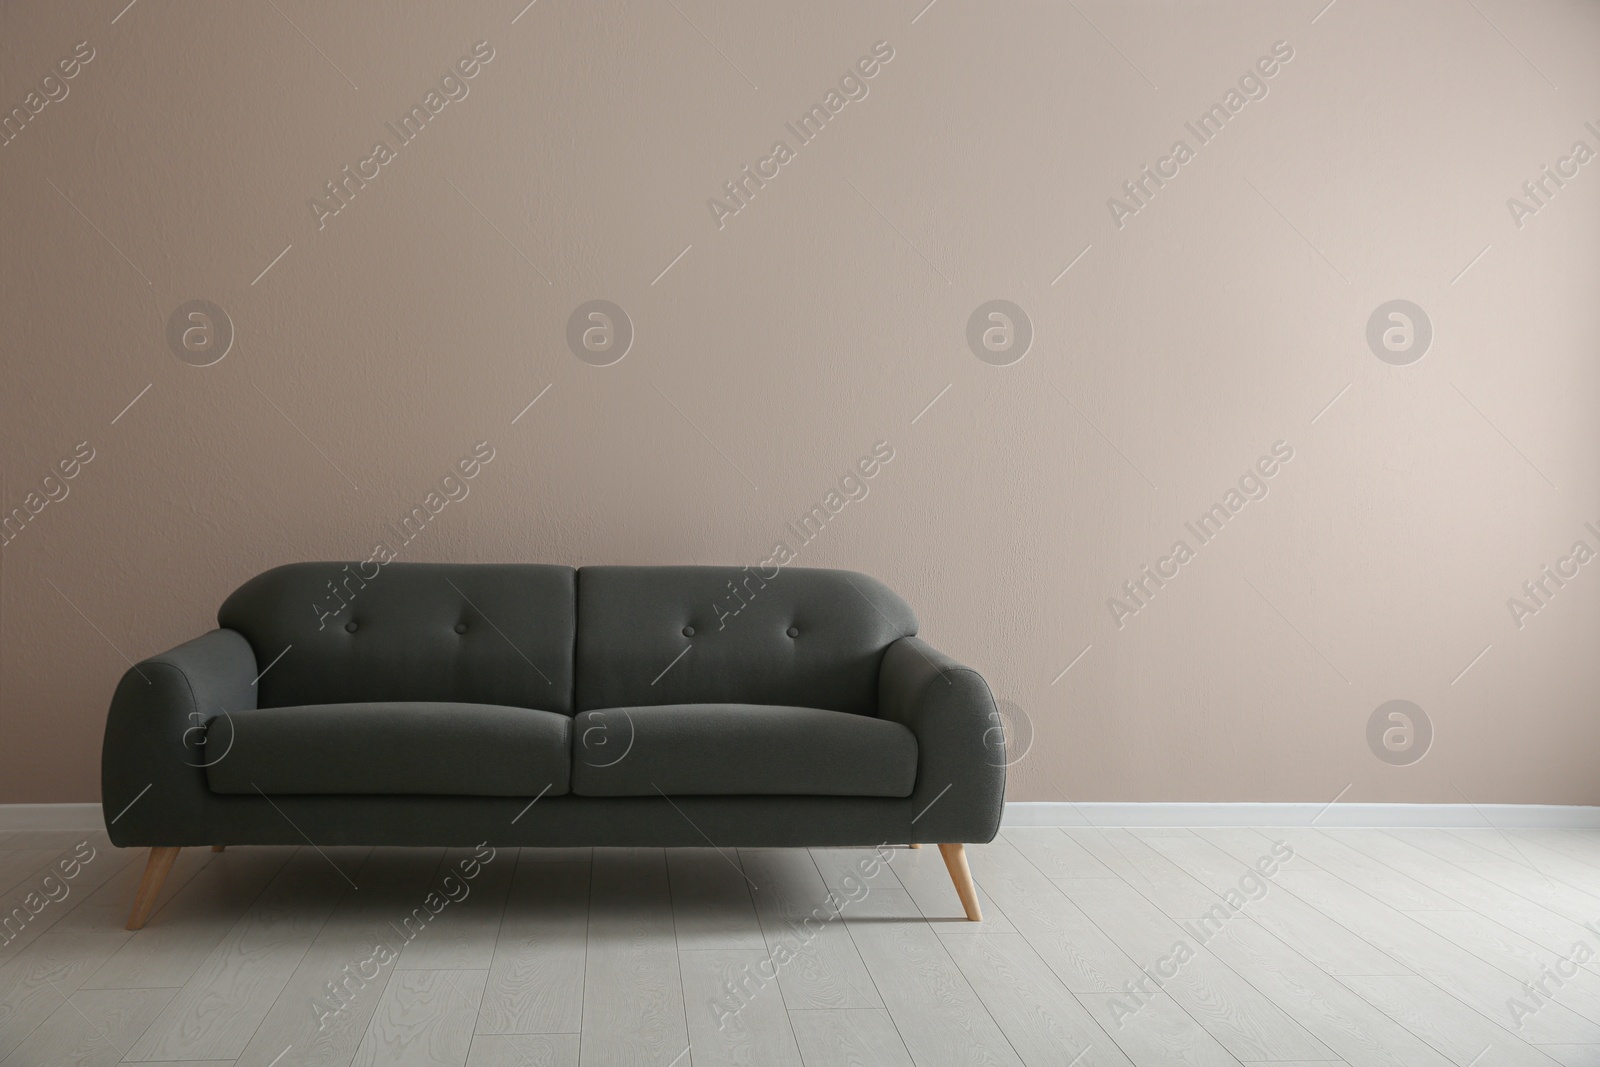 Photo of Comfortable grey sofa near beige wall indoors, space for text. Interior design